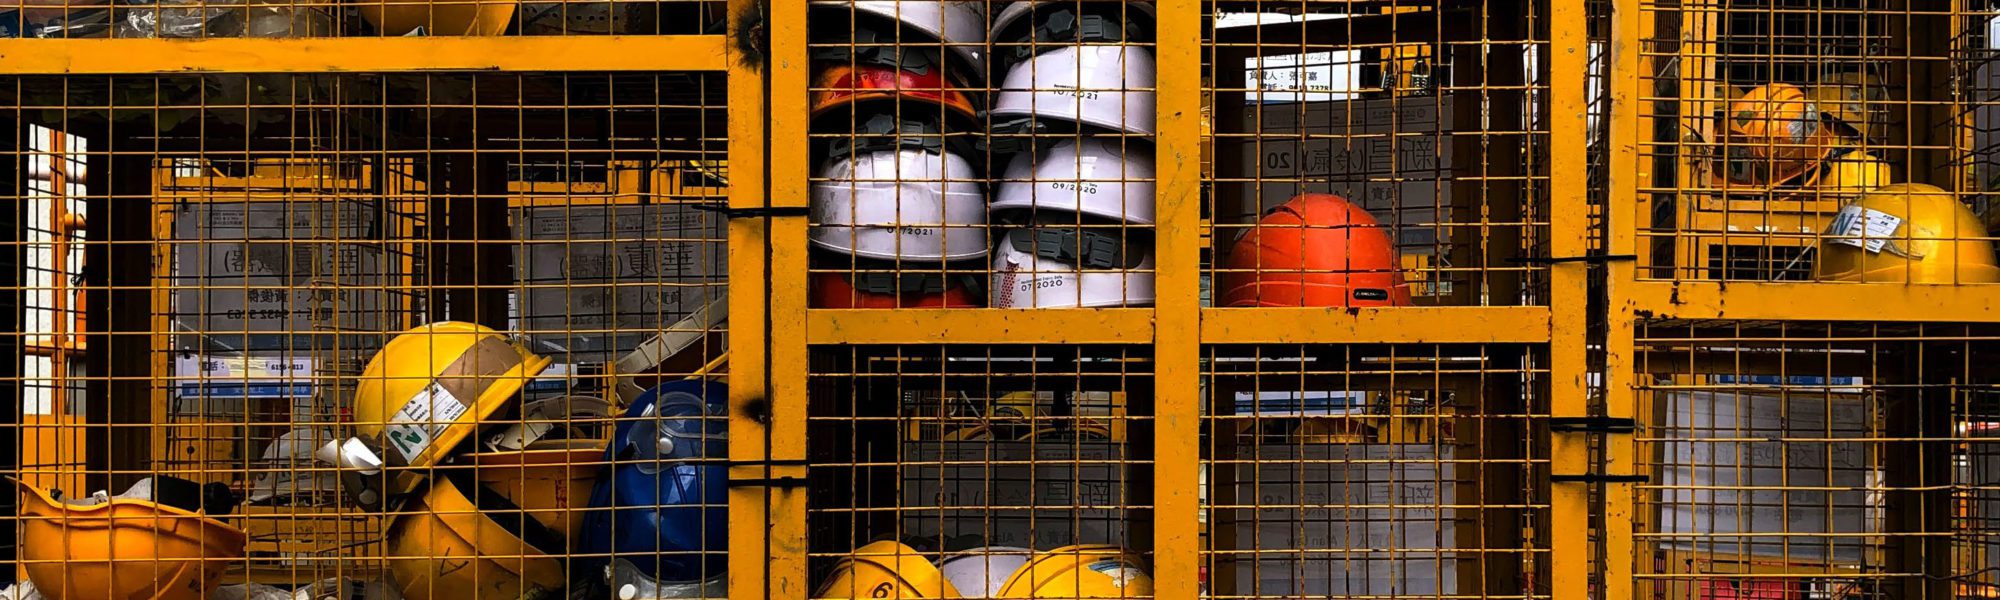 Construction PPE in caged storage